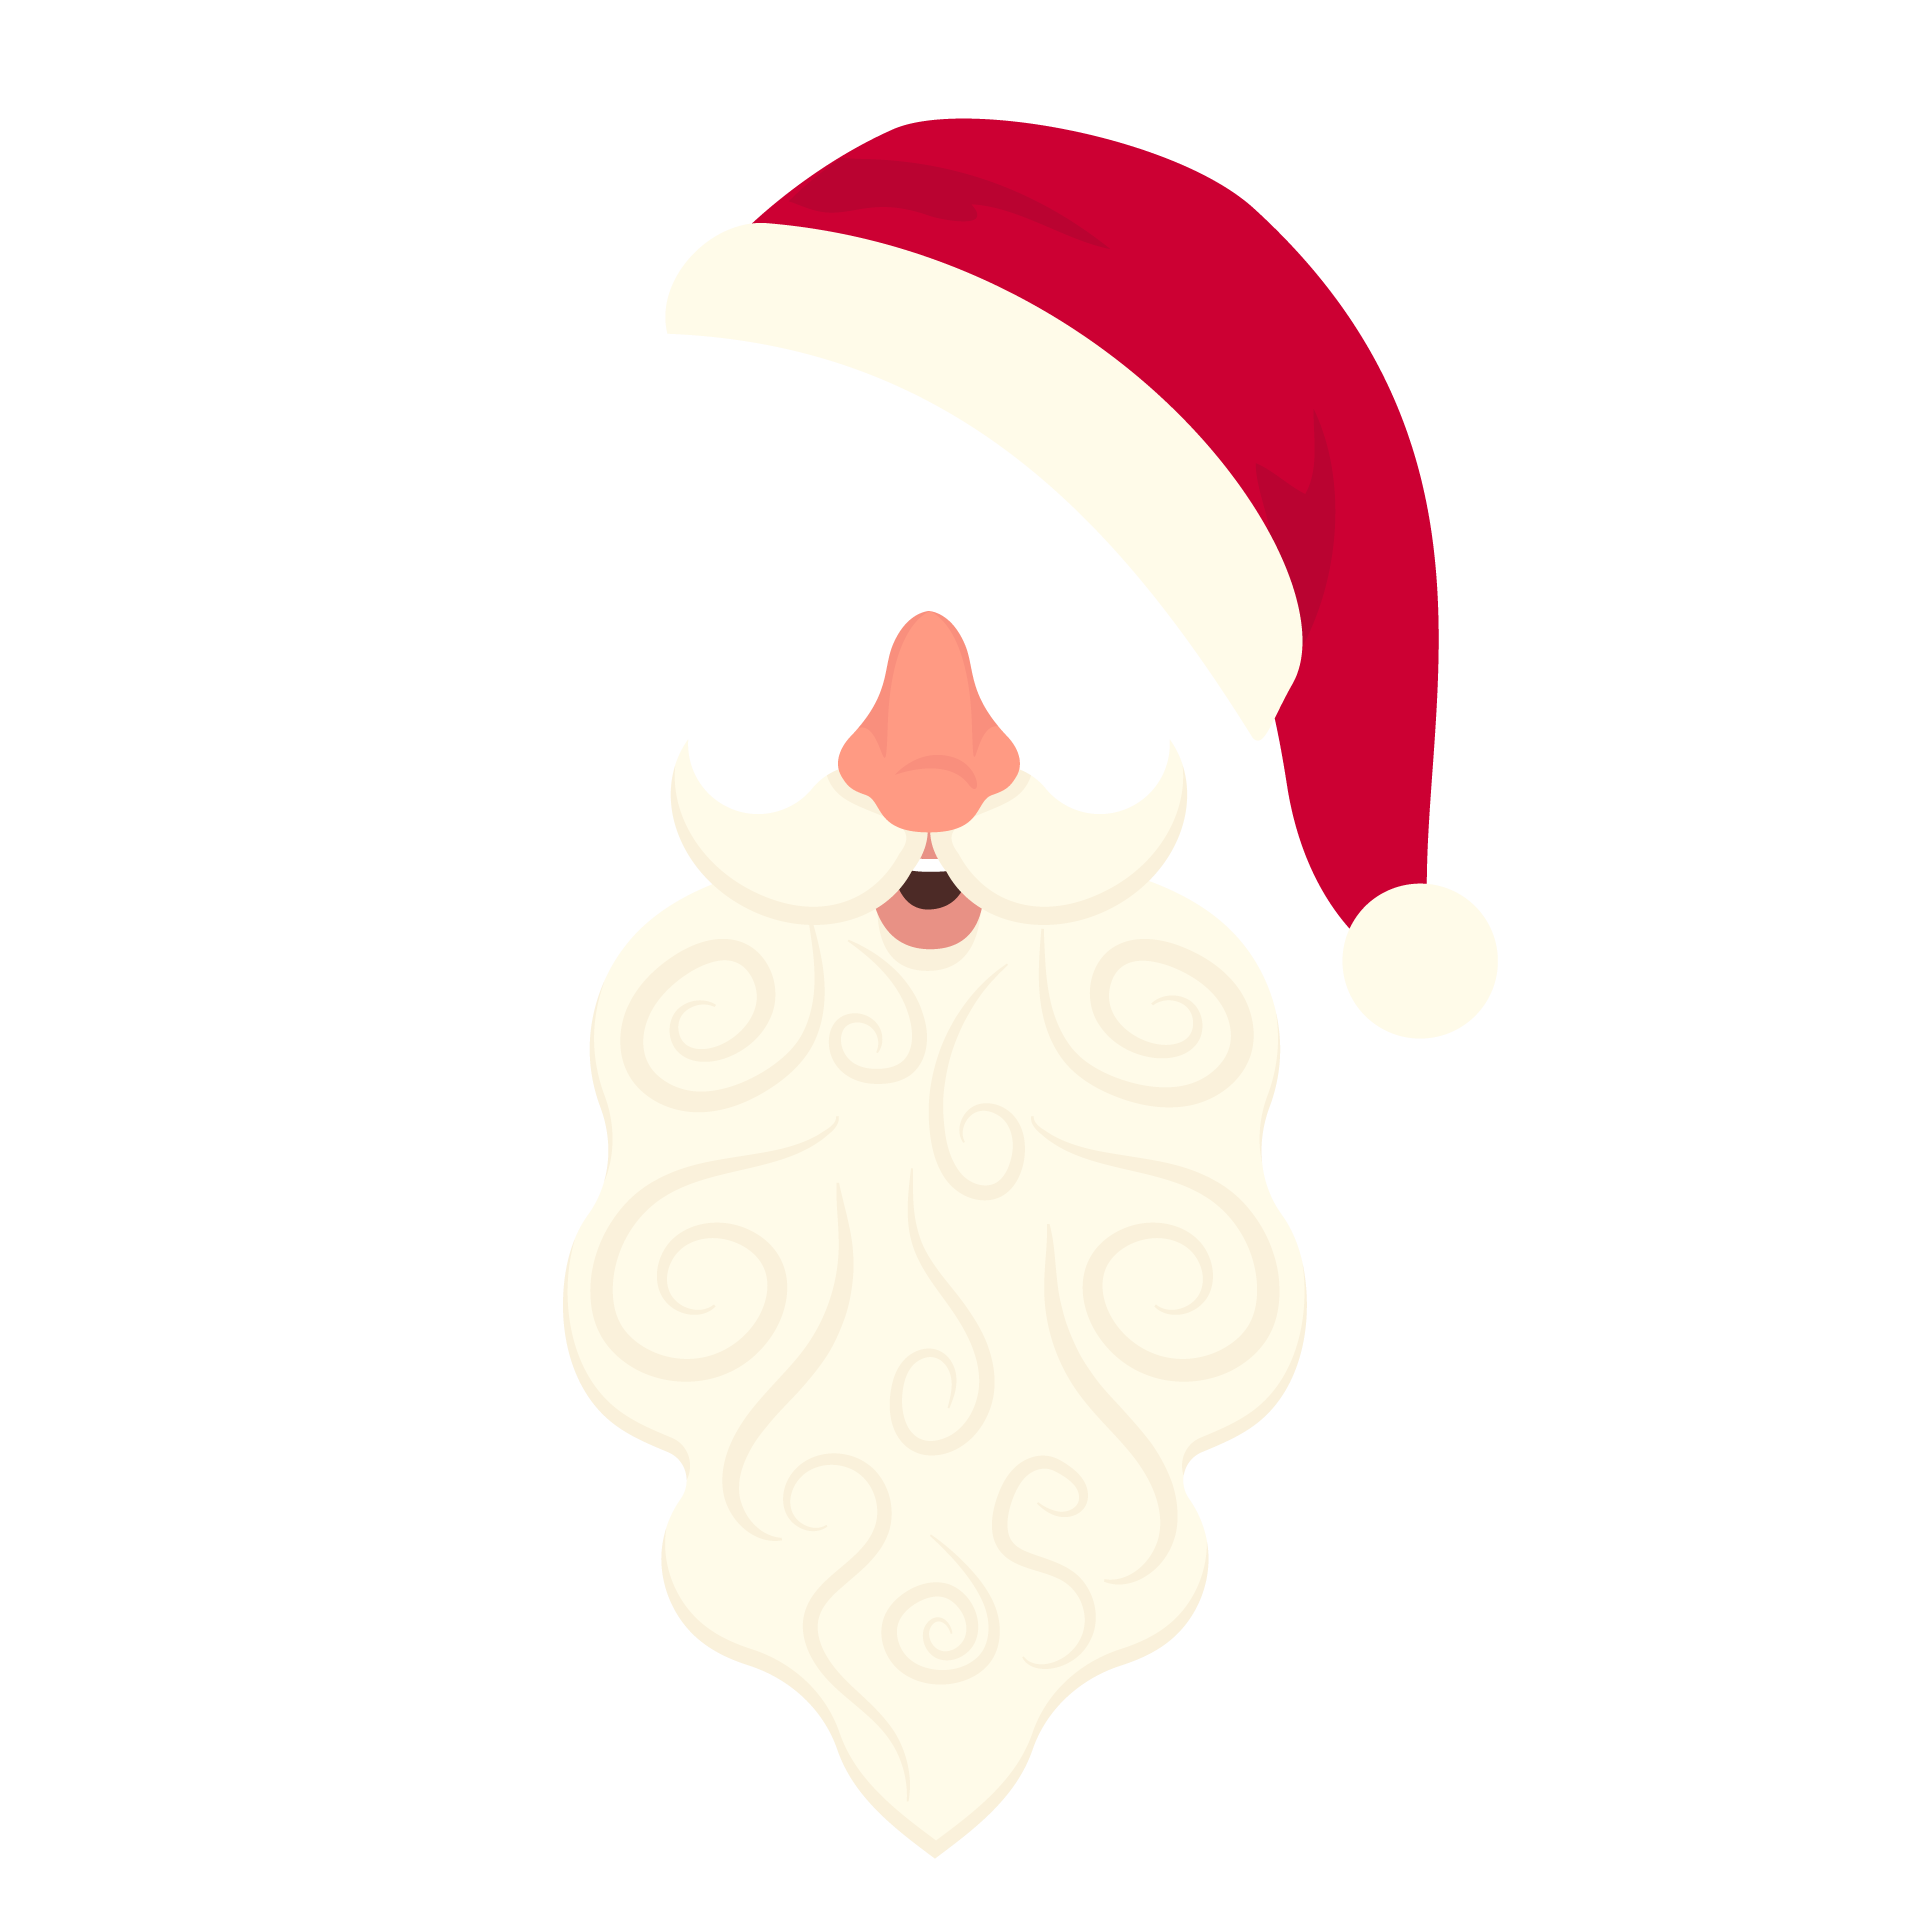 Different santas hats with nose funny white beards nice image